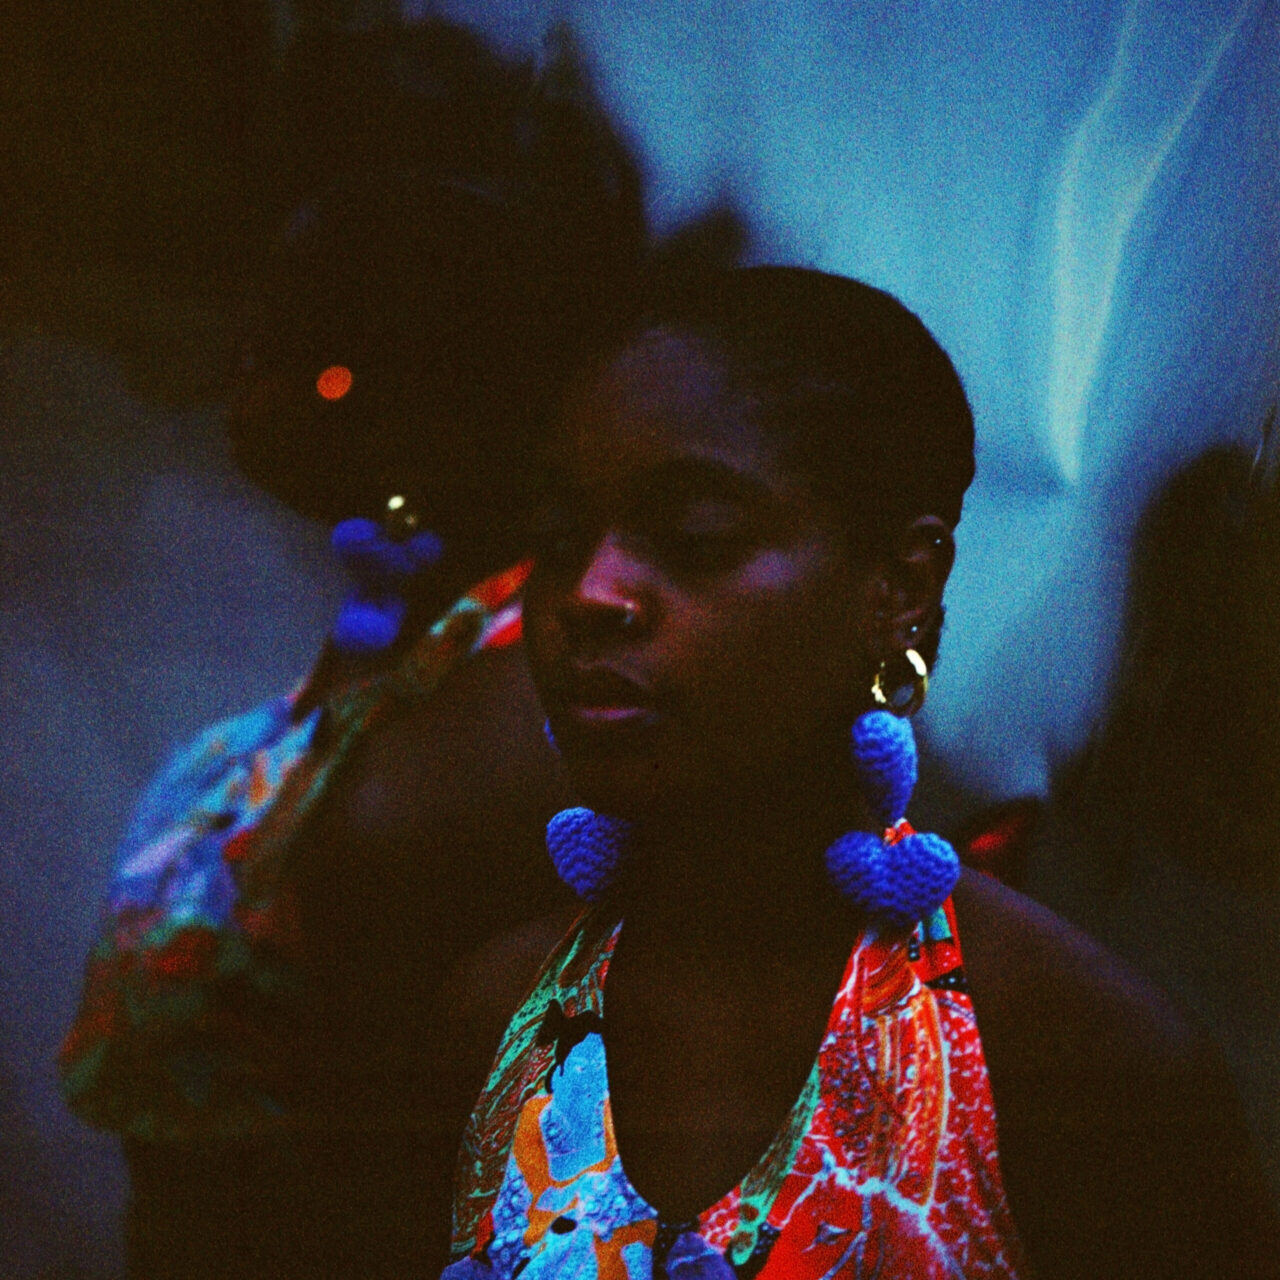 Neta, a deep brown-skinned person, wears a colorful halter top and large lavender heart-shaped crochet earrings as she stands in front of a reflective backdrop that doubles and distorts the image of her profile.